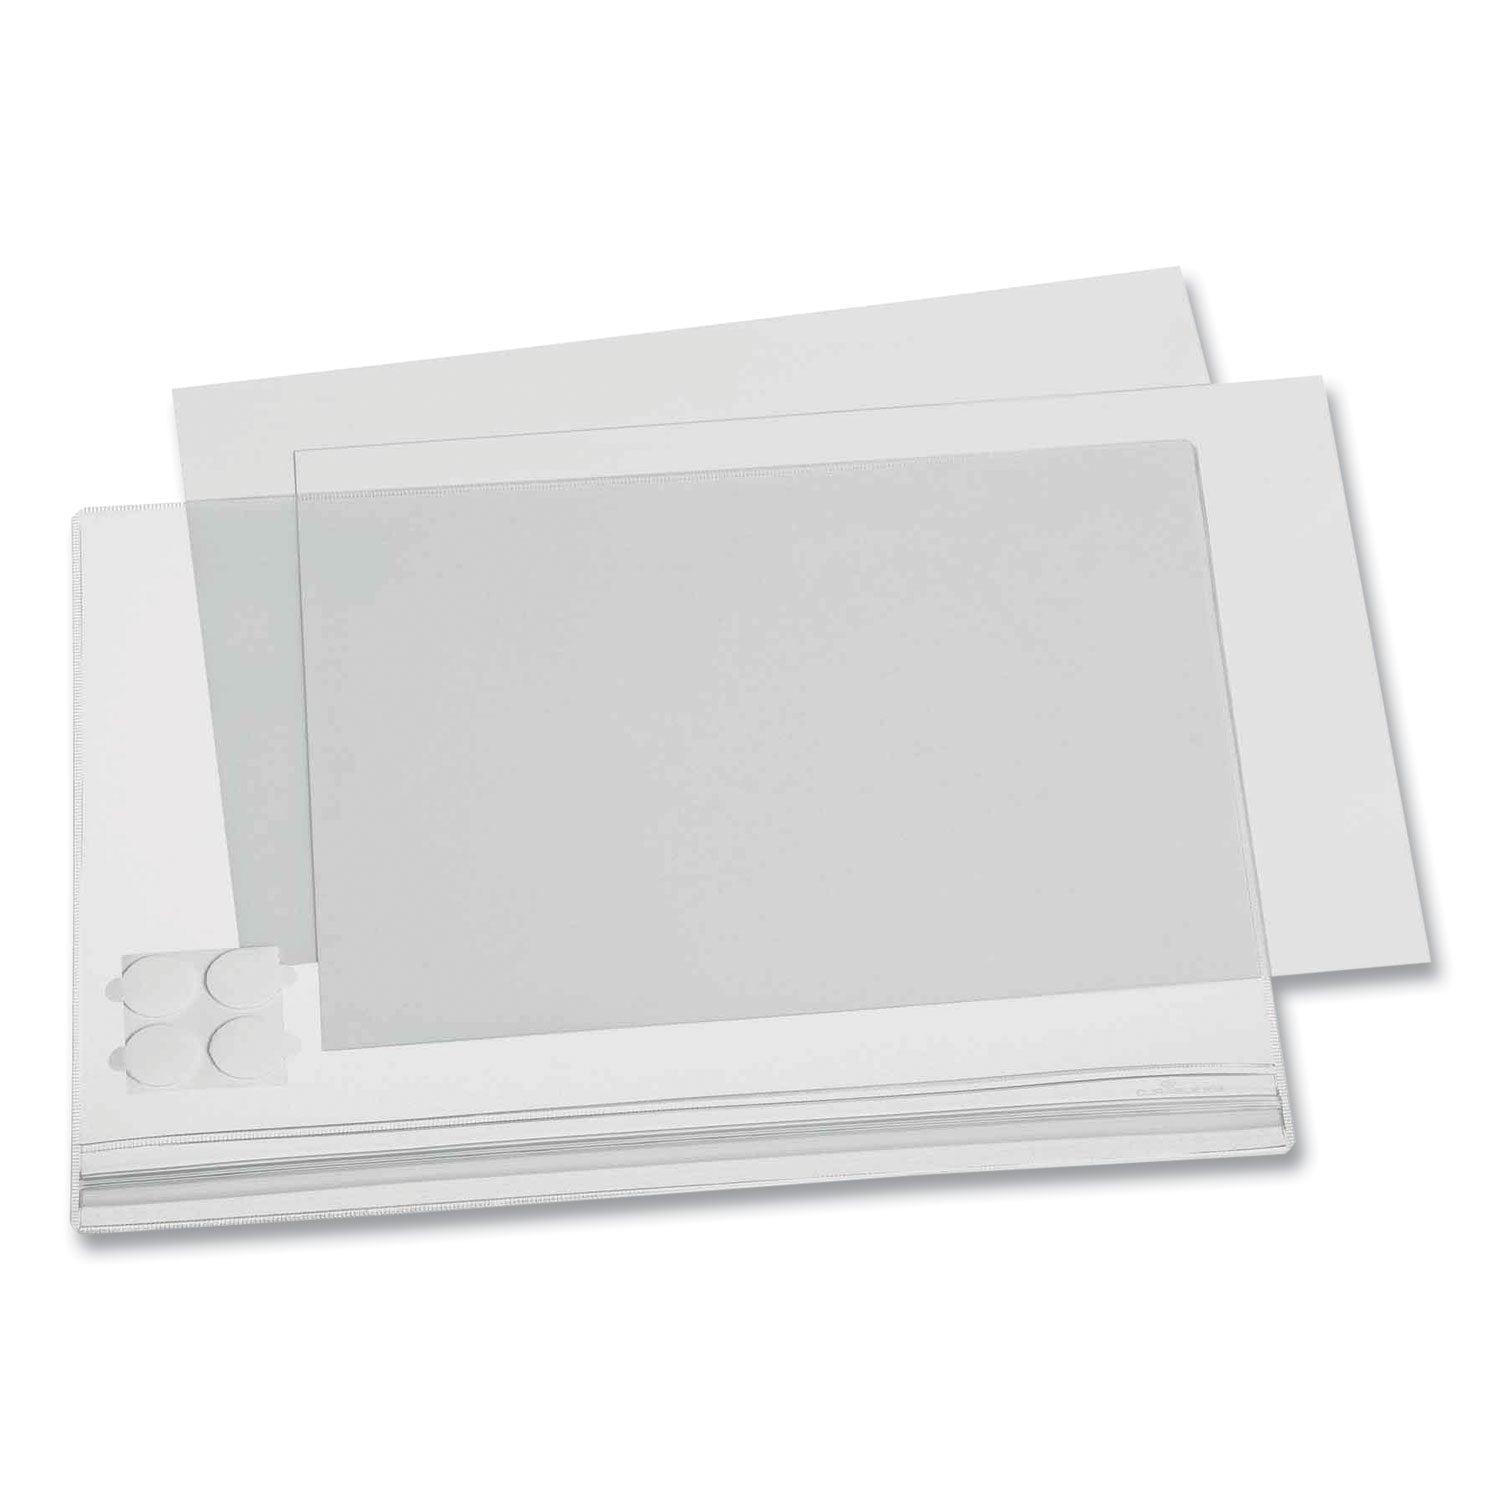 self-adhesive-water-resistant-sign-holder-85-x-11-clear-frame-5-pack_dbl501619 - 1